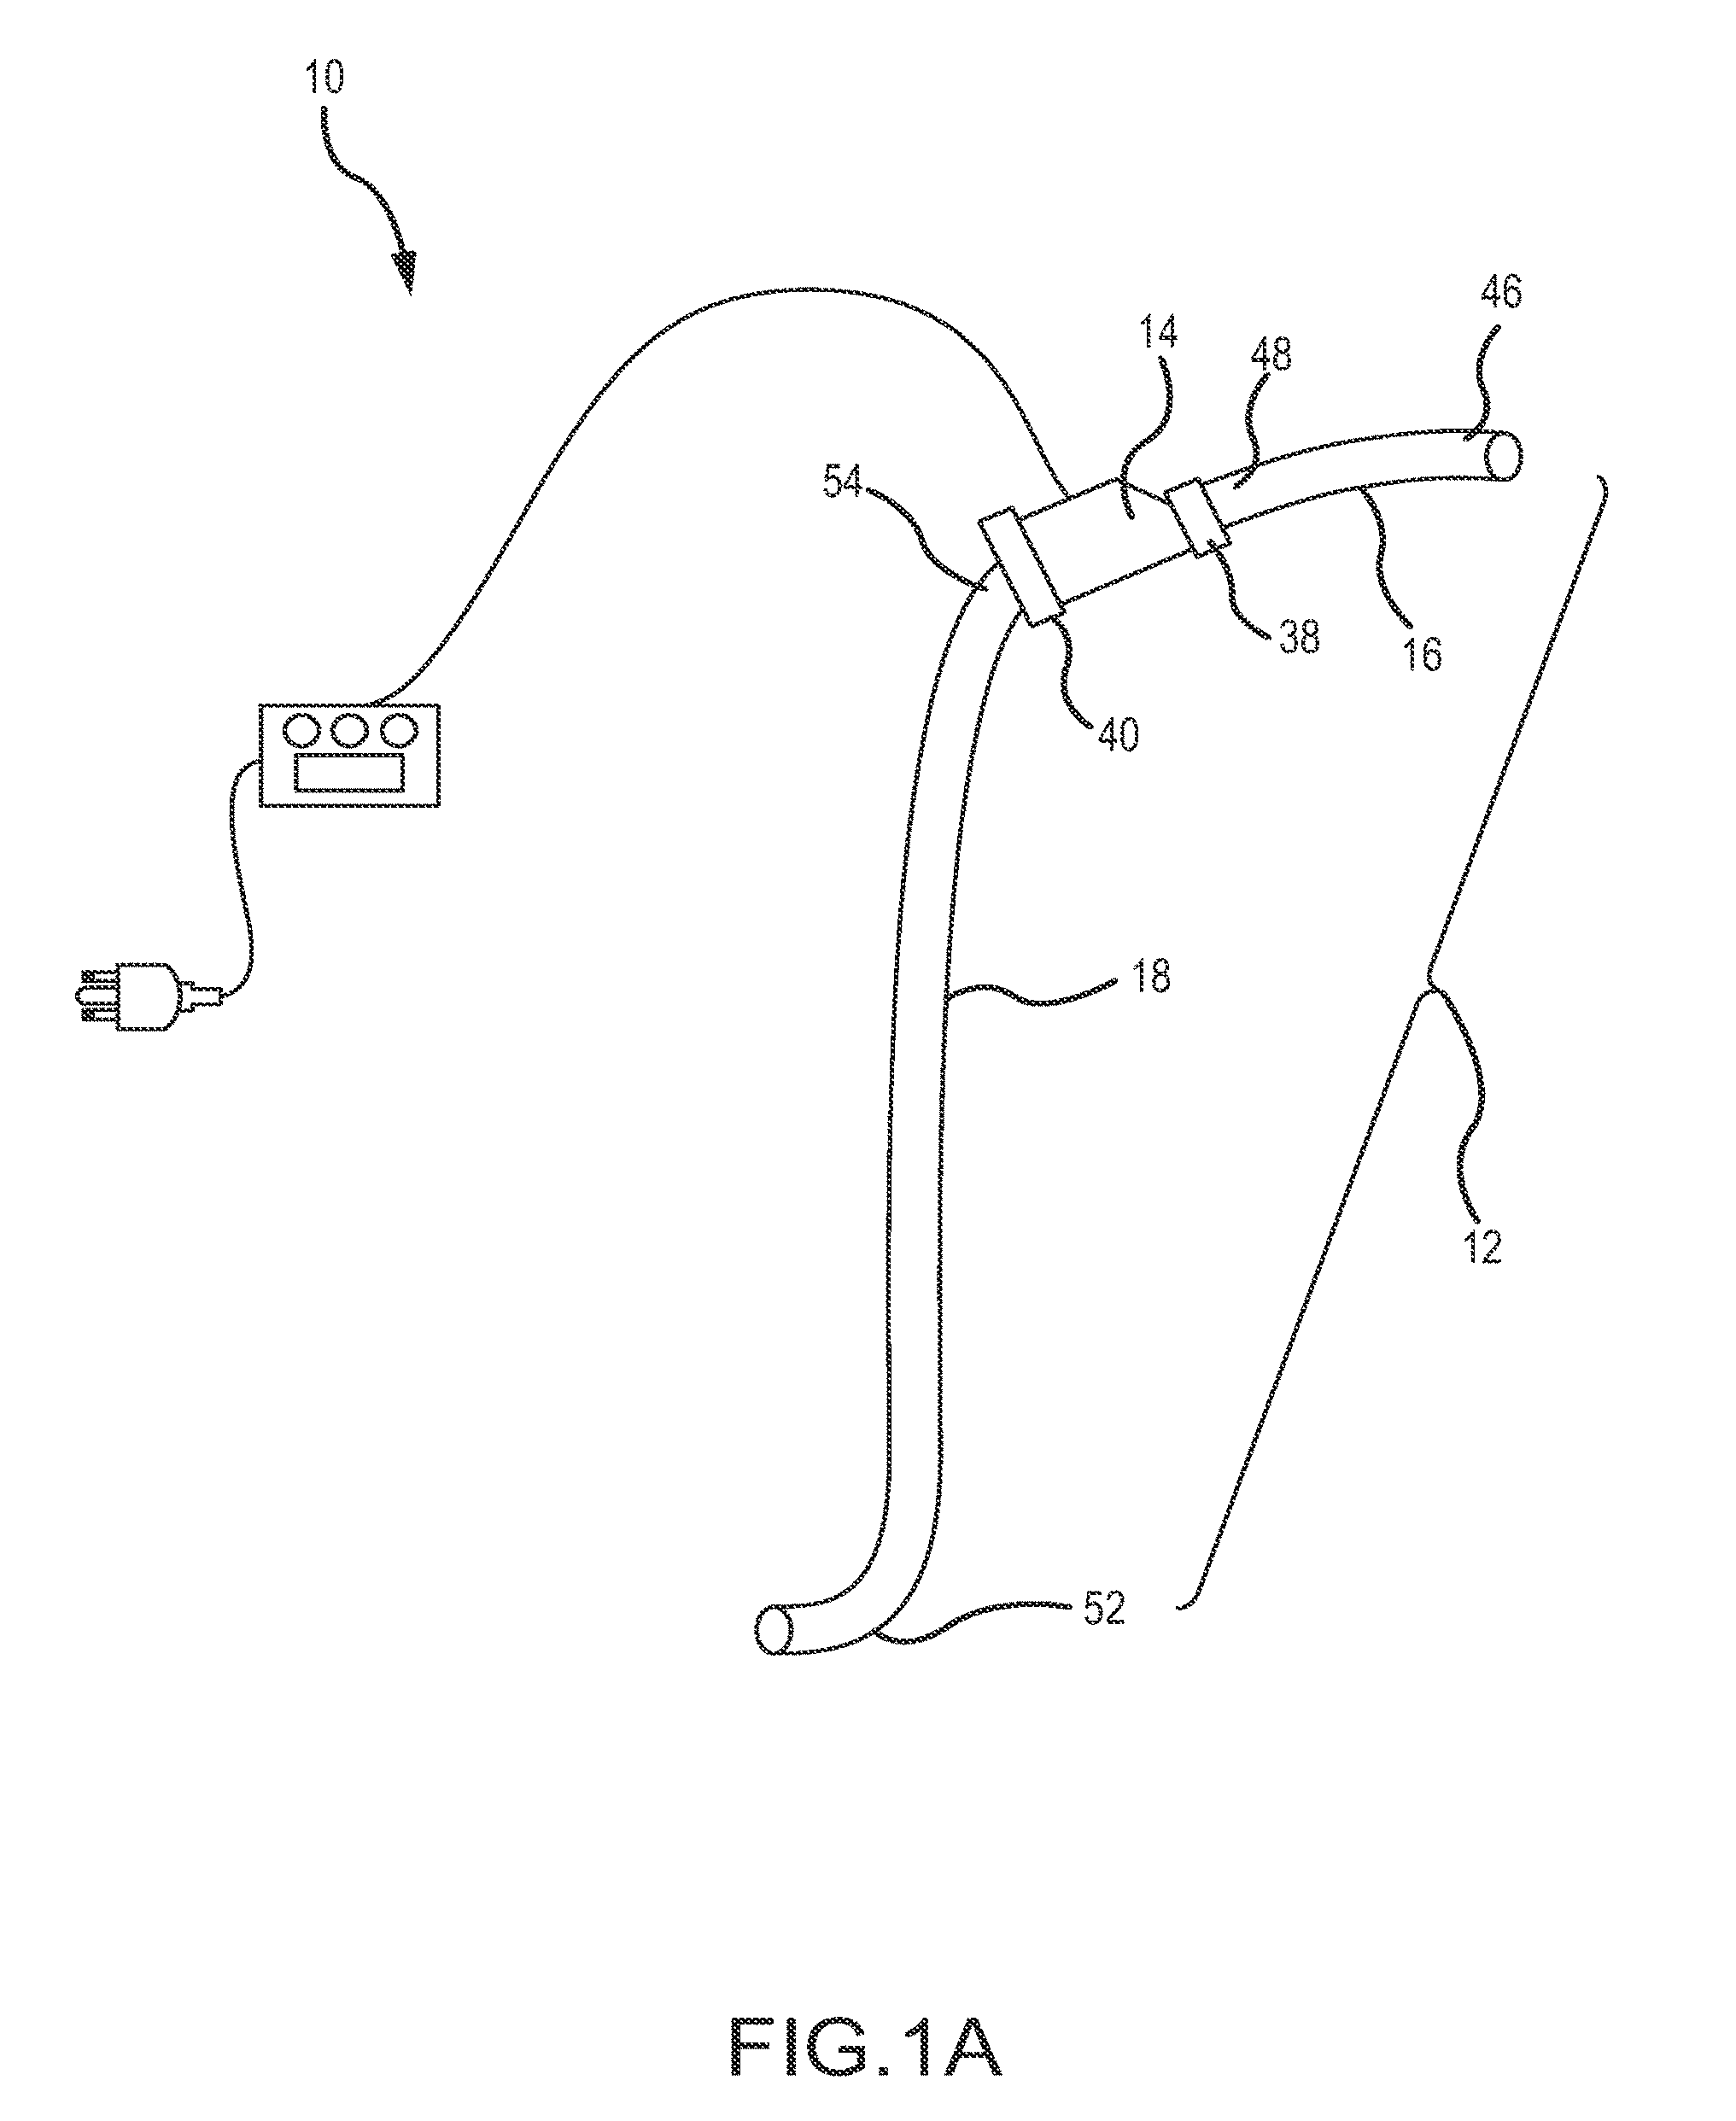 System and method to increase the overall diameter of veins